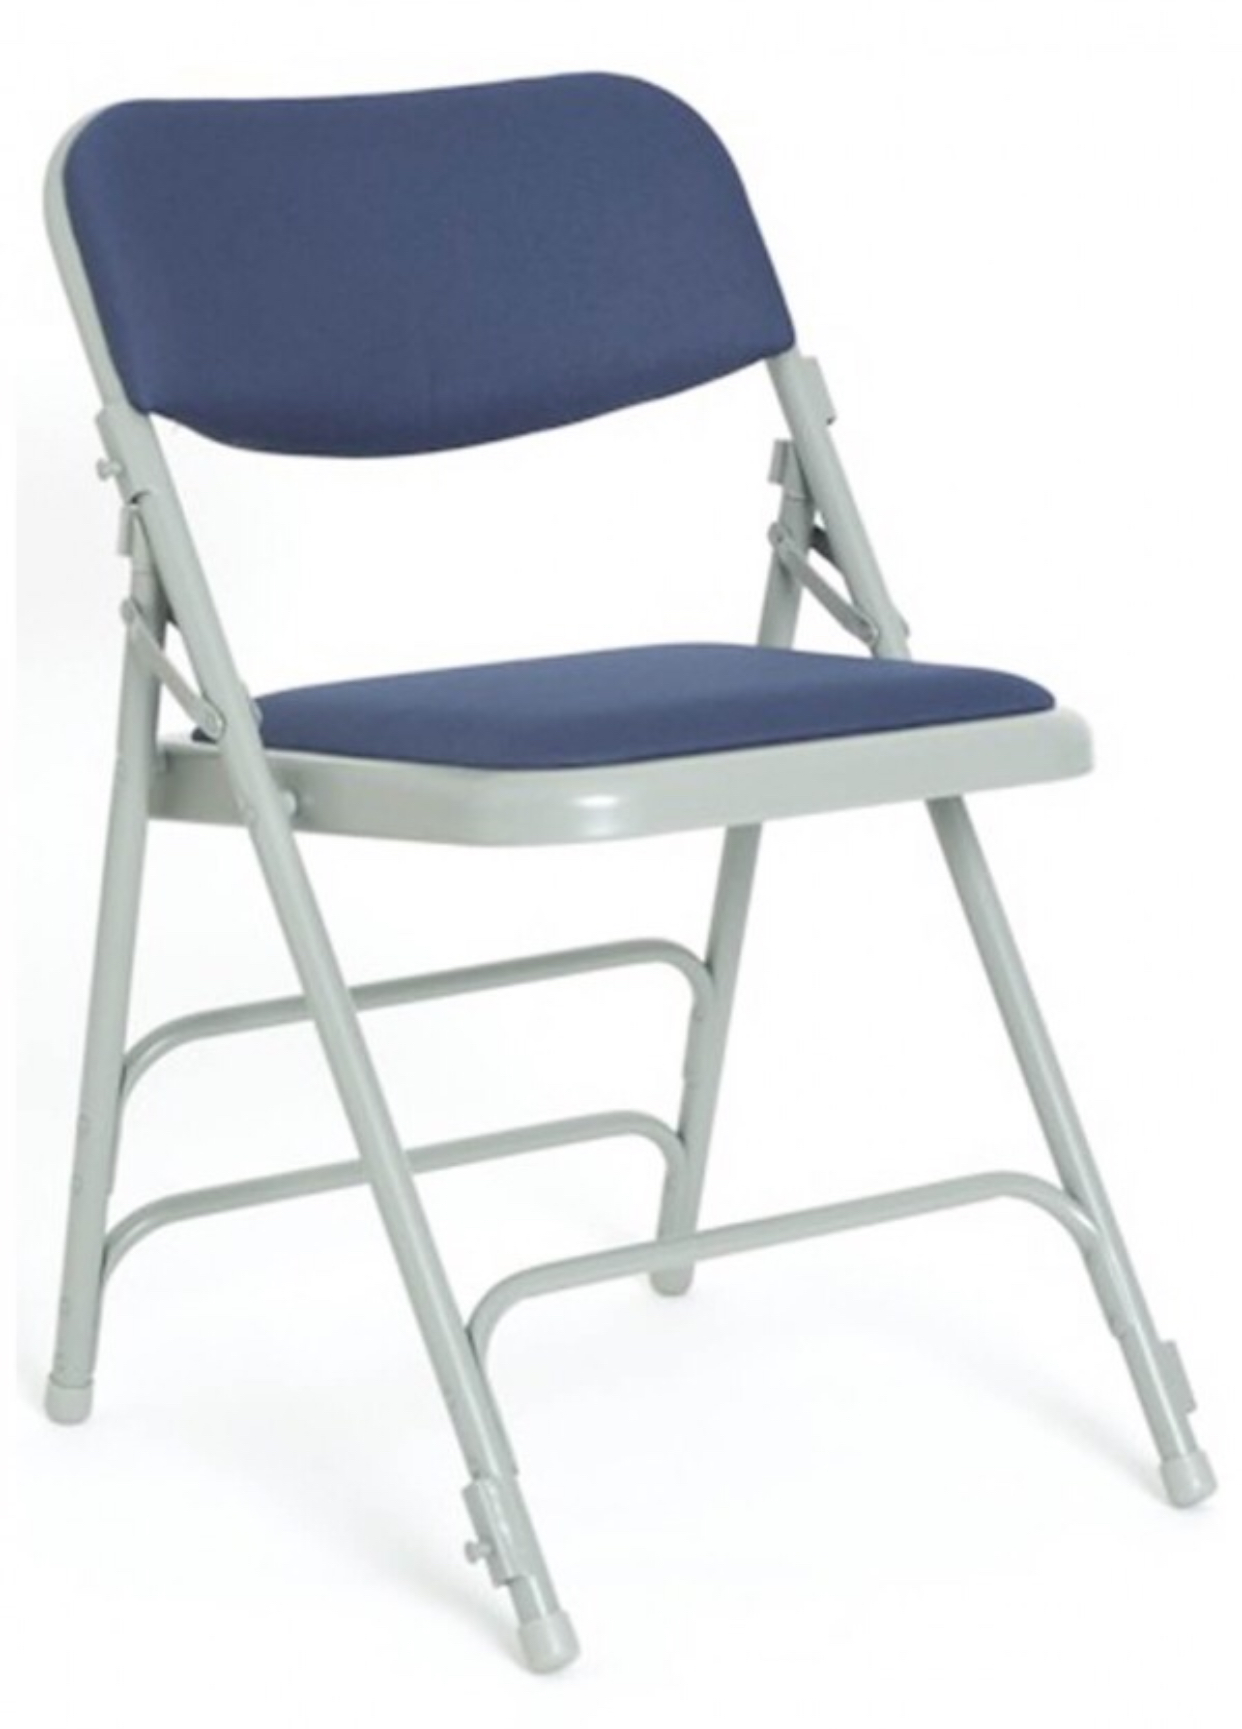 Folding Padded Seat And Back Chair. Blue  1 